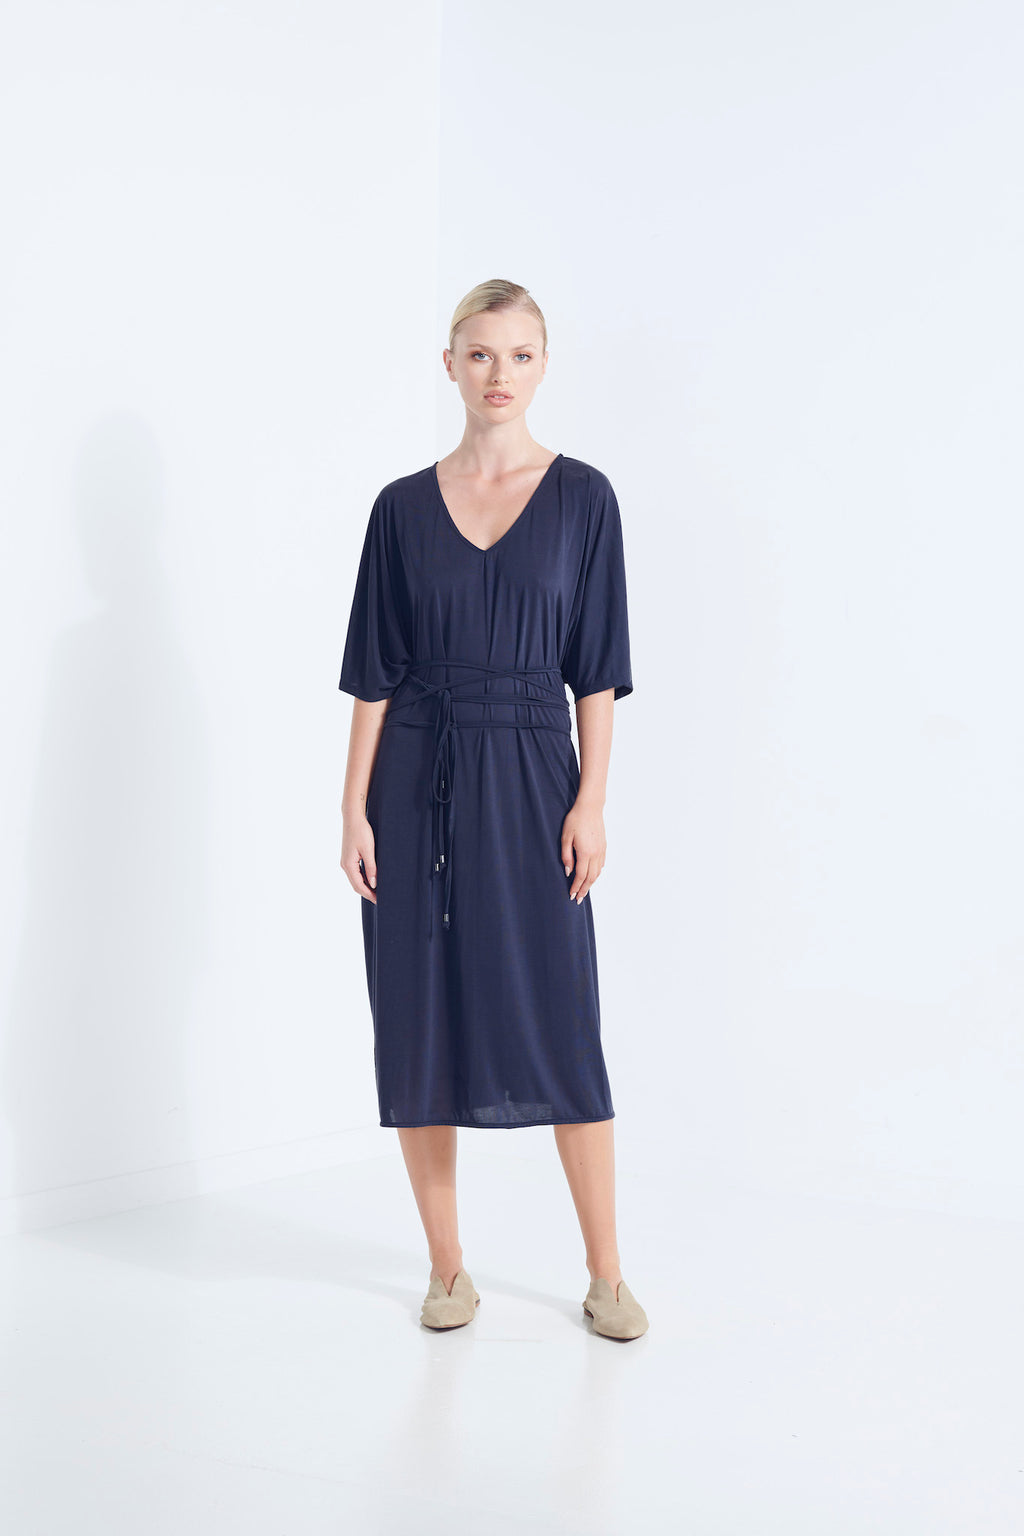 THALIA DRESS BEECHWOOD MODAL WITH WRAP TIE AND HEM SPLITS AEGEAN WASHED NAVY FRONT VIEW  